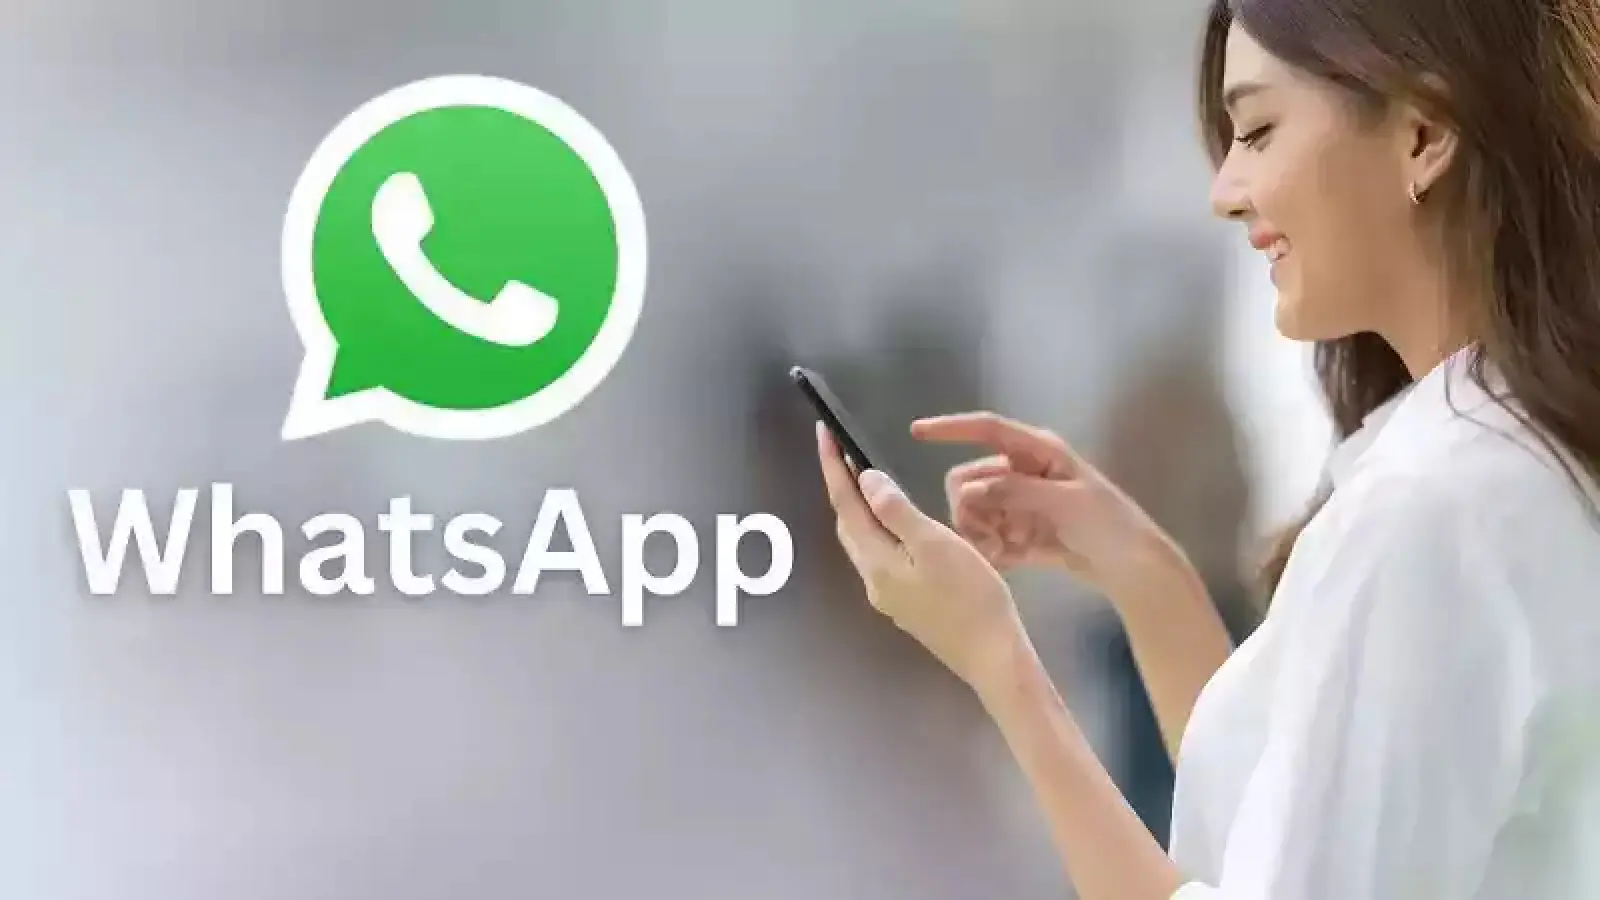 WhatsApp video calling is going to be more fun than before, now you can share your favorite song with your loved ones